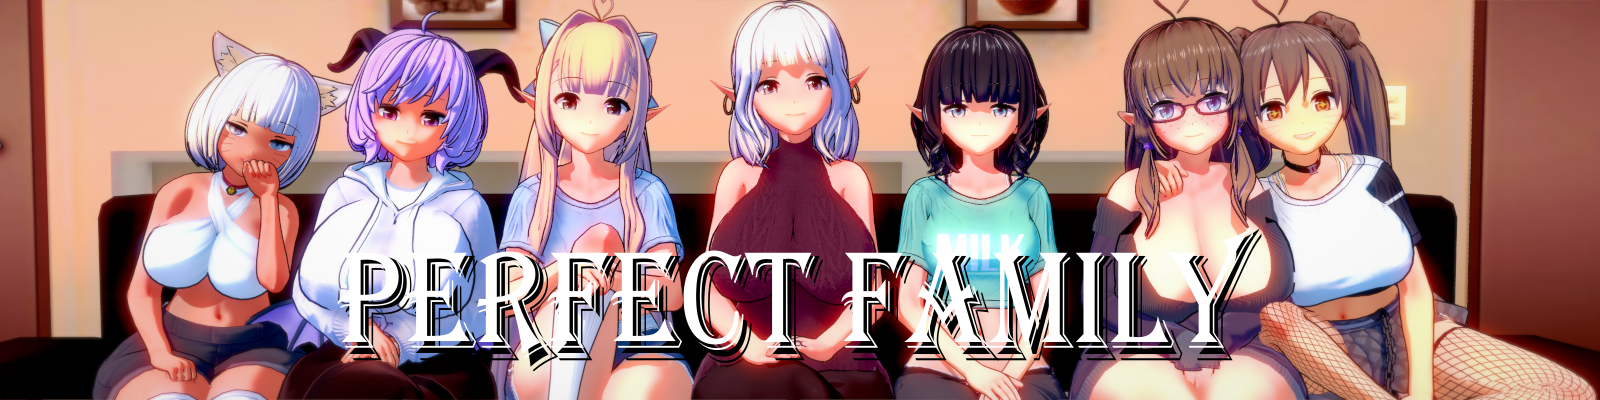 All Free Family Porn Hentai - Download Free Hentai Game Porn Games Perfect Family